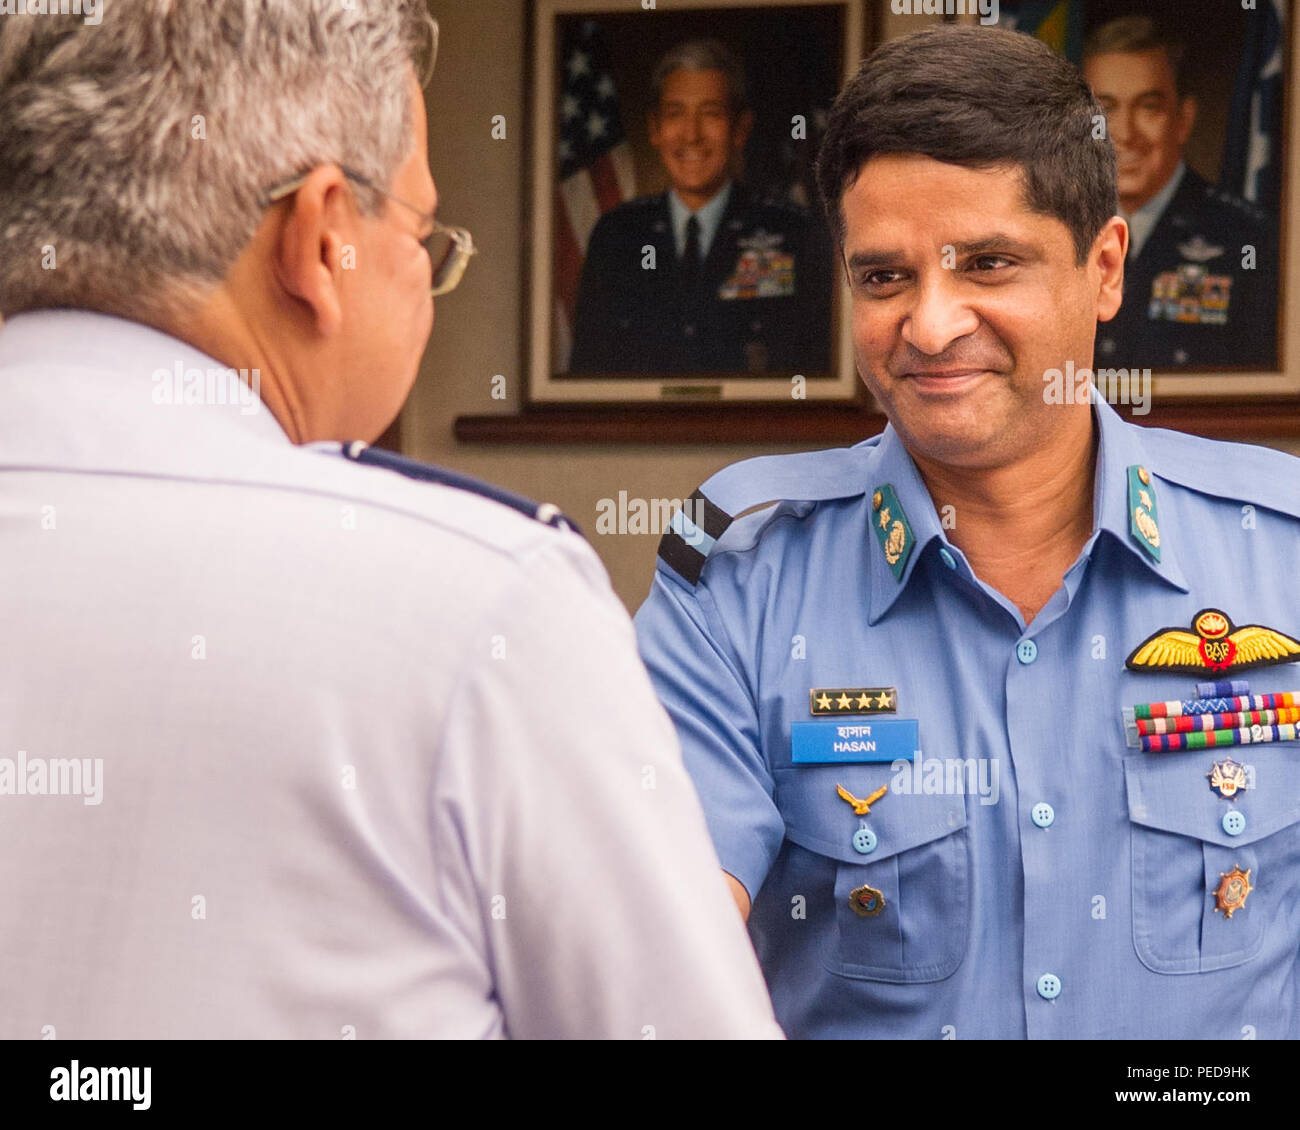 Bangladesh Air Force Air Commodore Hasan Khan, Bangladesh Air Force plans director, and U.S. Air Force Maj. Gen. Abel Barrientes, Pacific Air Forces vice commander's individual mobility assistant, shake hands during Airman-to-Airman Talks, Joint Base Pearl Harbor-Hickam, Hawaii, Aug. 6, 2015. The aim of the inaugural U.S. and Bangladesh Airman-to-Airman Talks was to bolster an earnest relationship between key leaders and pave the way for future cooperation among the two air forces. Discussion topics focused on a number of key matters which will enable both countries to plan future bilateral an Stock Photo